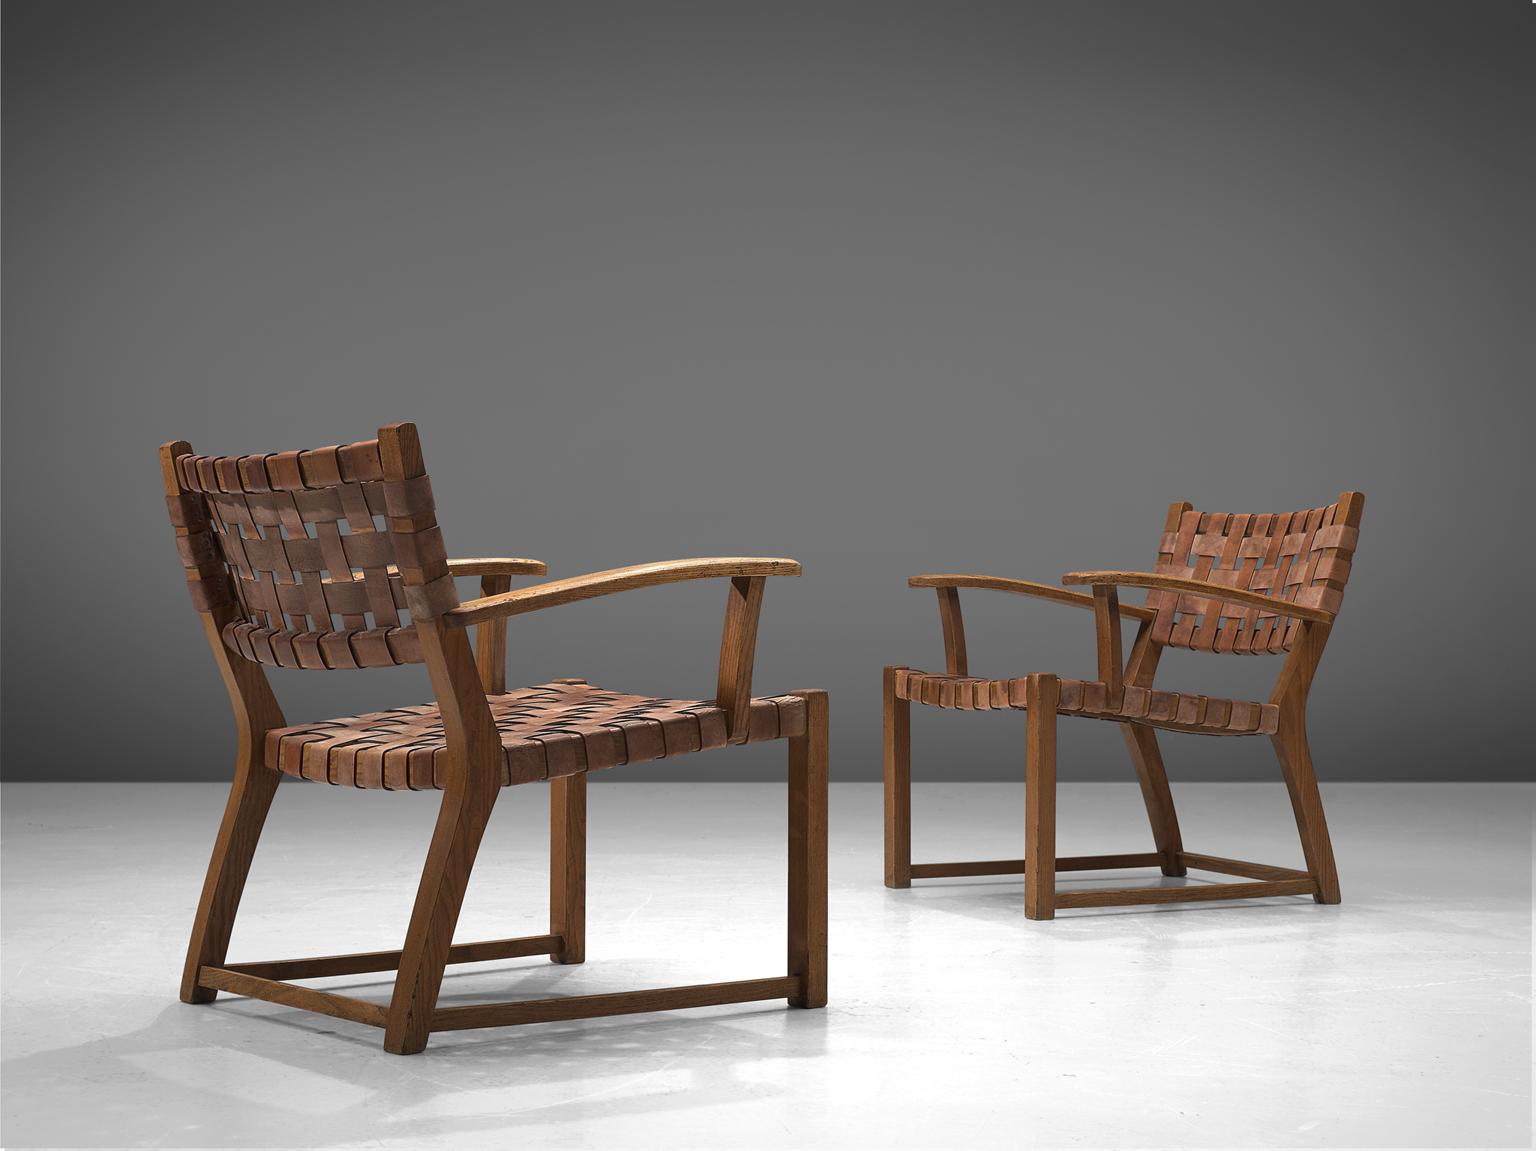 Armchairs, leather and oak, Scandinavia, 1950s

These elegant armchairs feature wonderful patinated leather on both seat and back. The patina on this chair creates a vibrant look and the straps in the seat form a thick, well-constructed yet